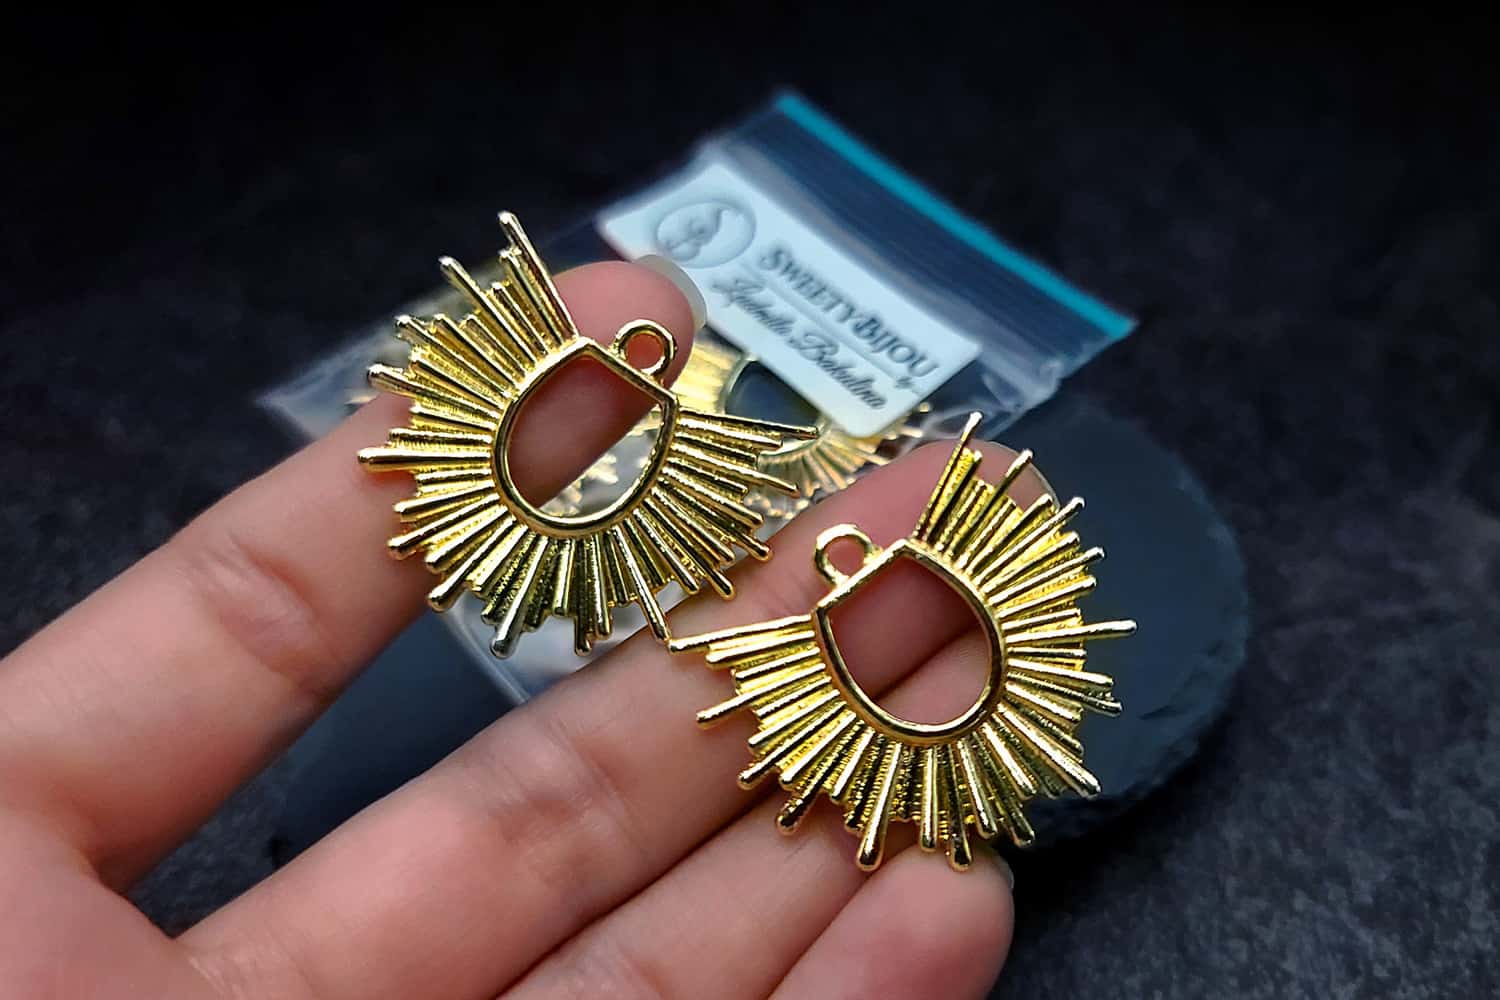 Pair of golden color half-sun charms for earrings (27257)